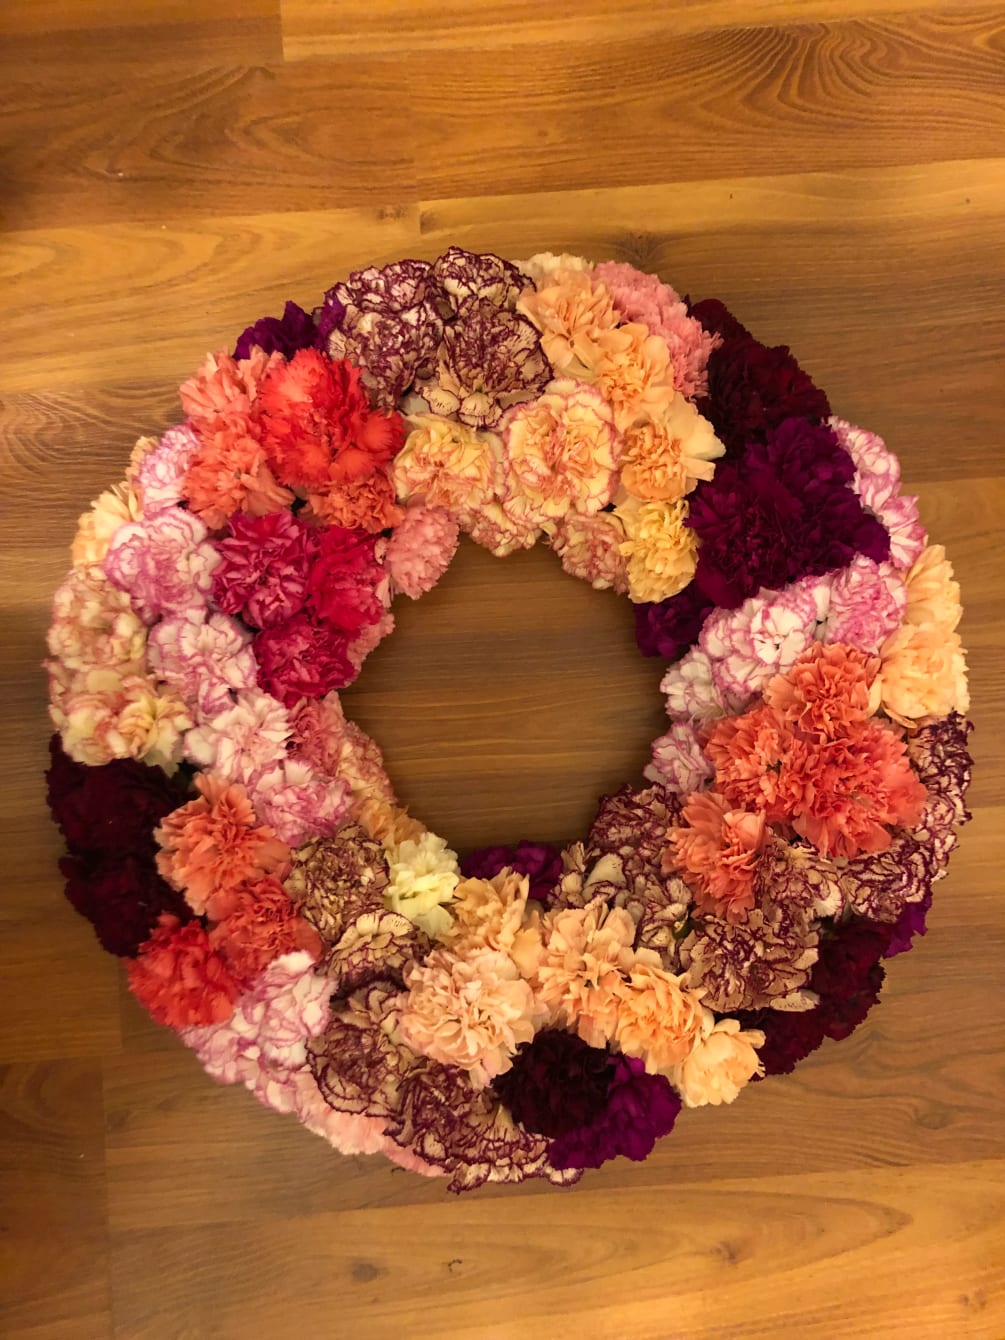 This lovingly designed wreath symbolize your love for one who passed away.